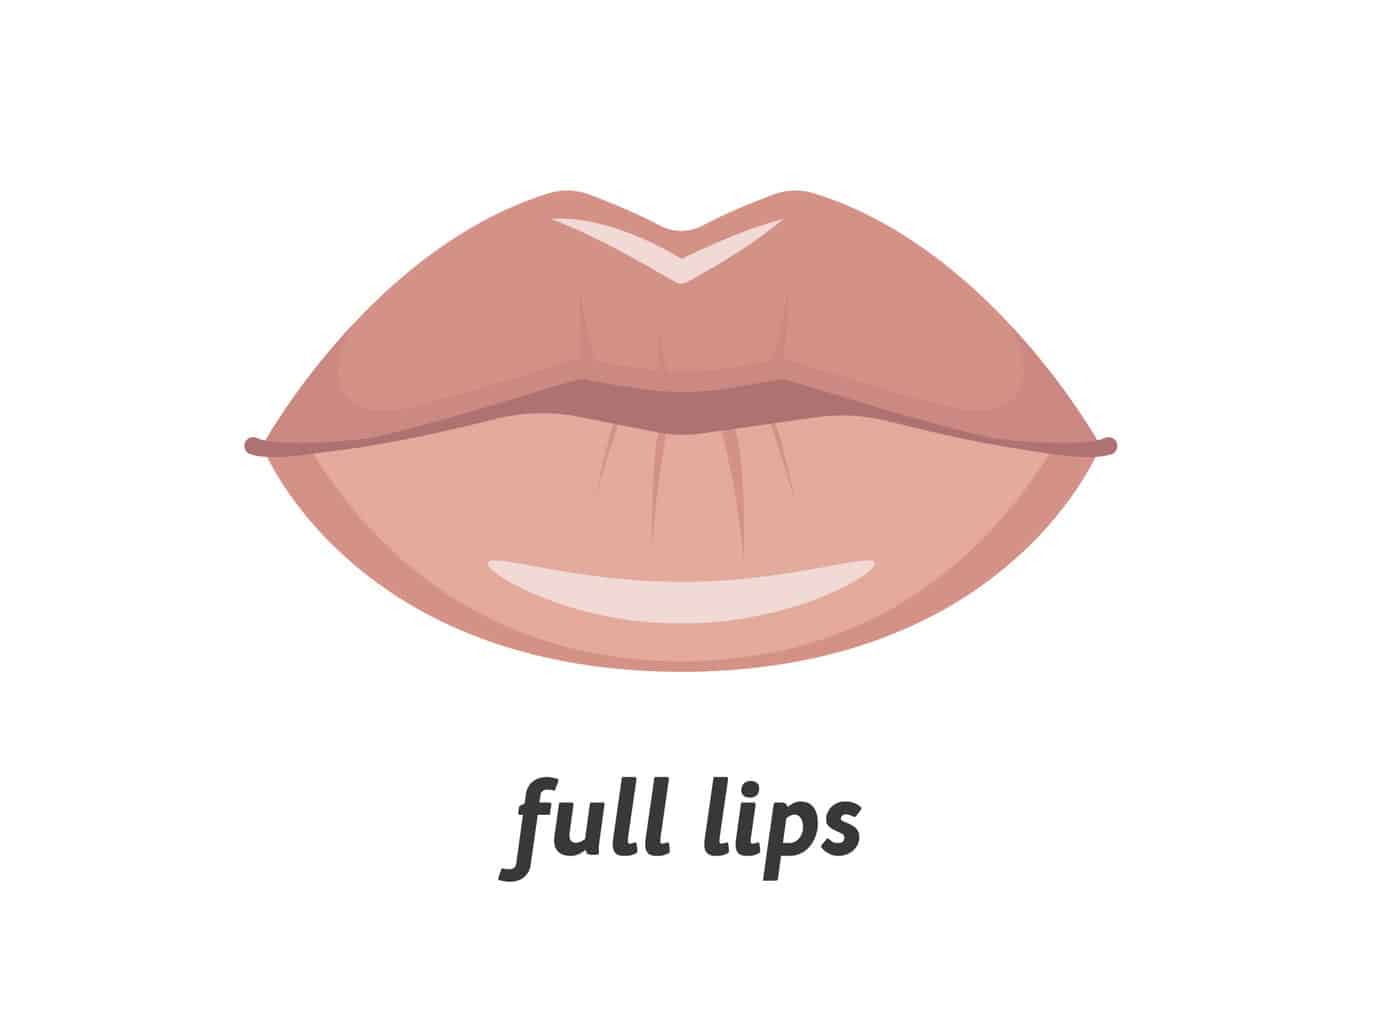 graphic of full lips with text beneath